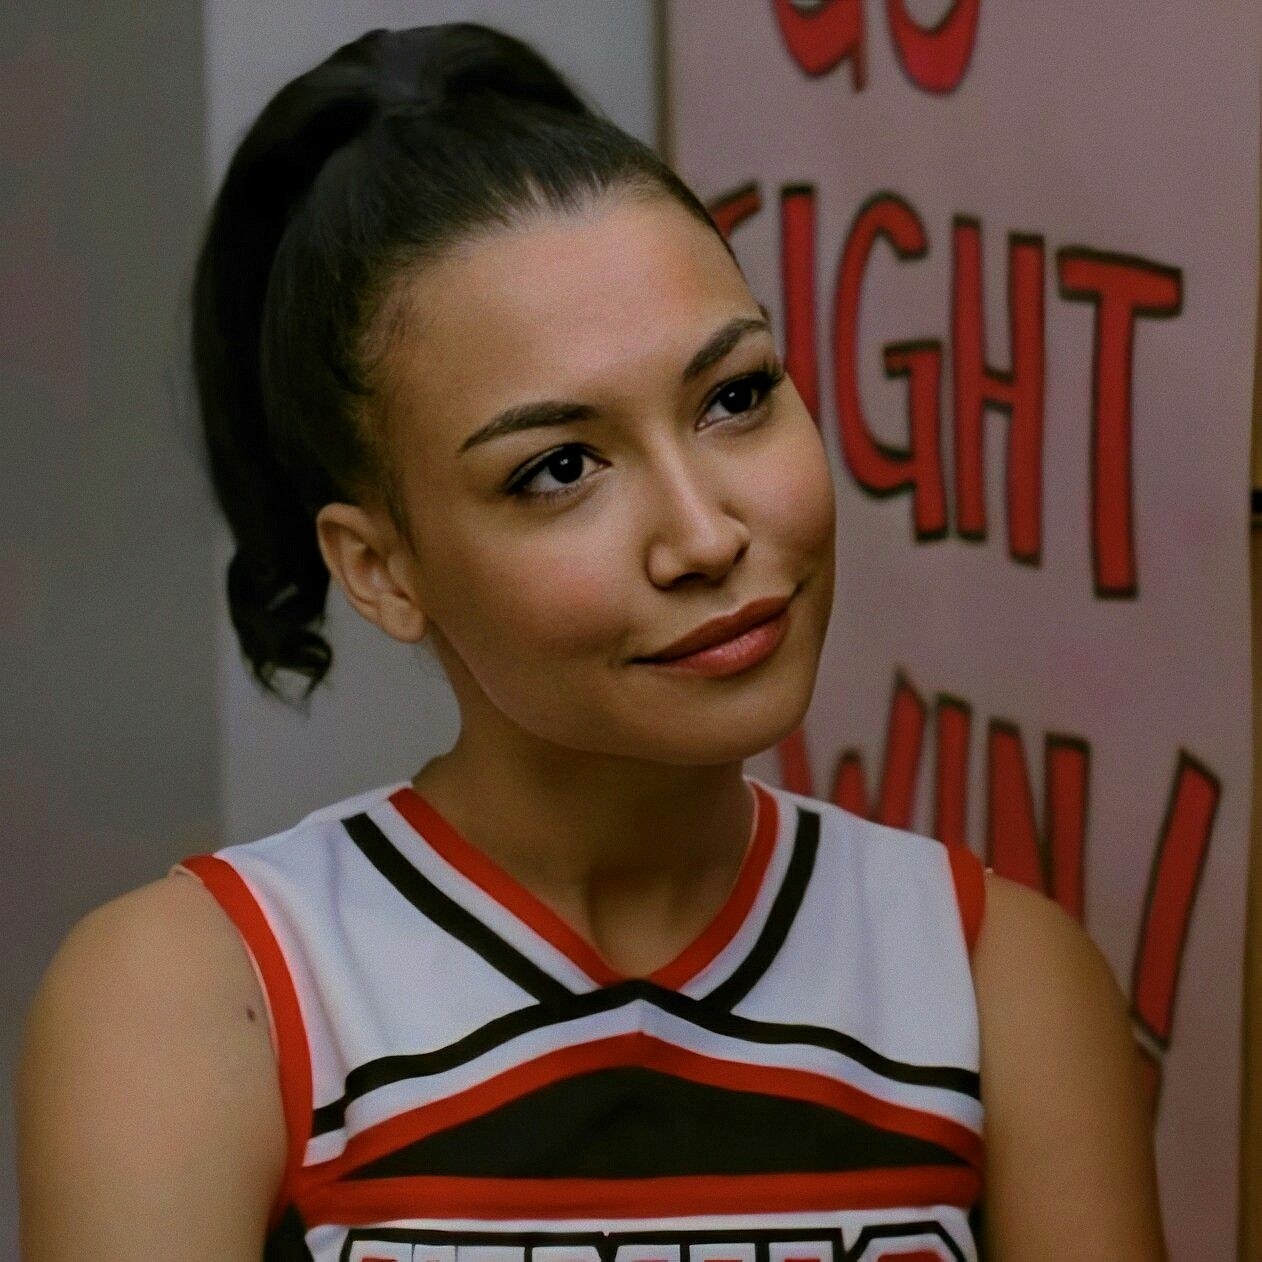 Santana smiling while wearing her cheerleading outfit